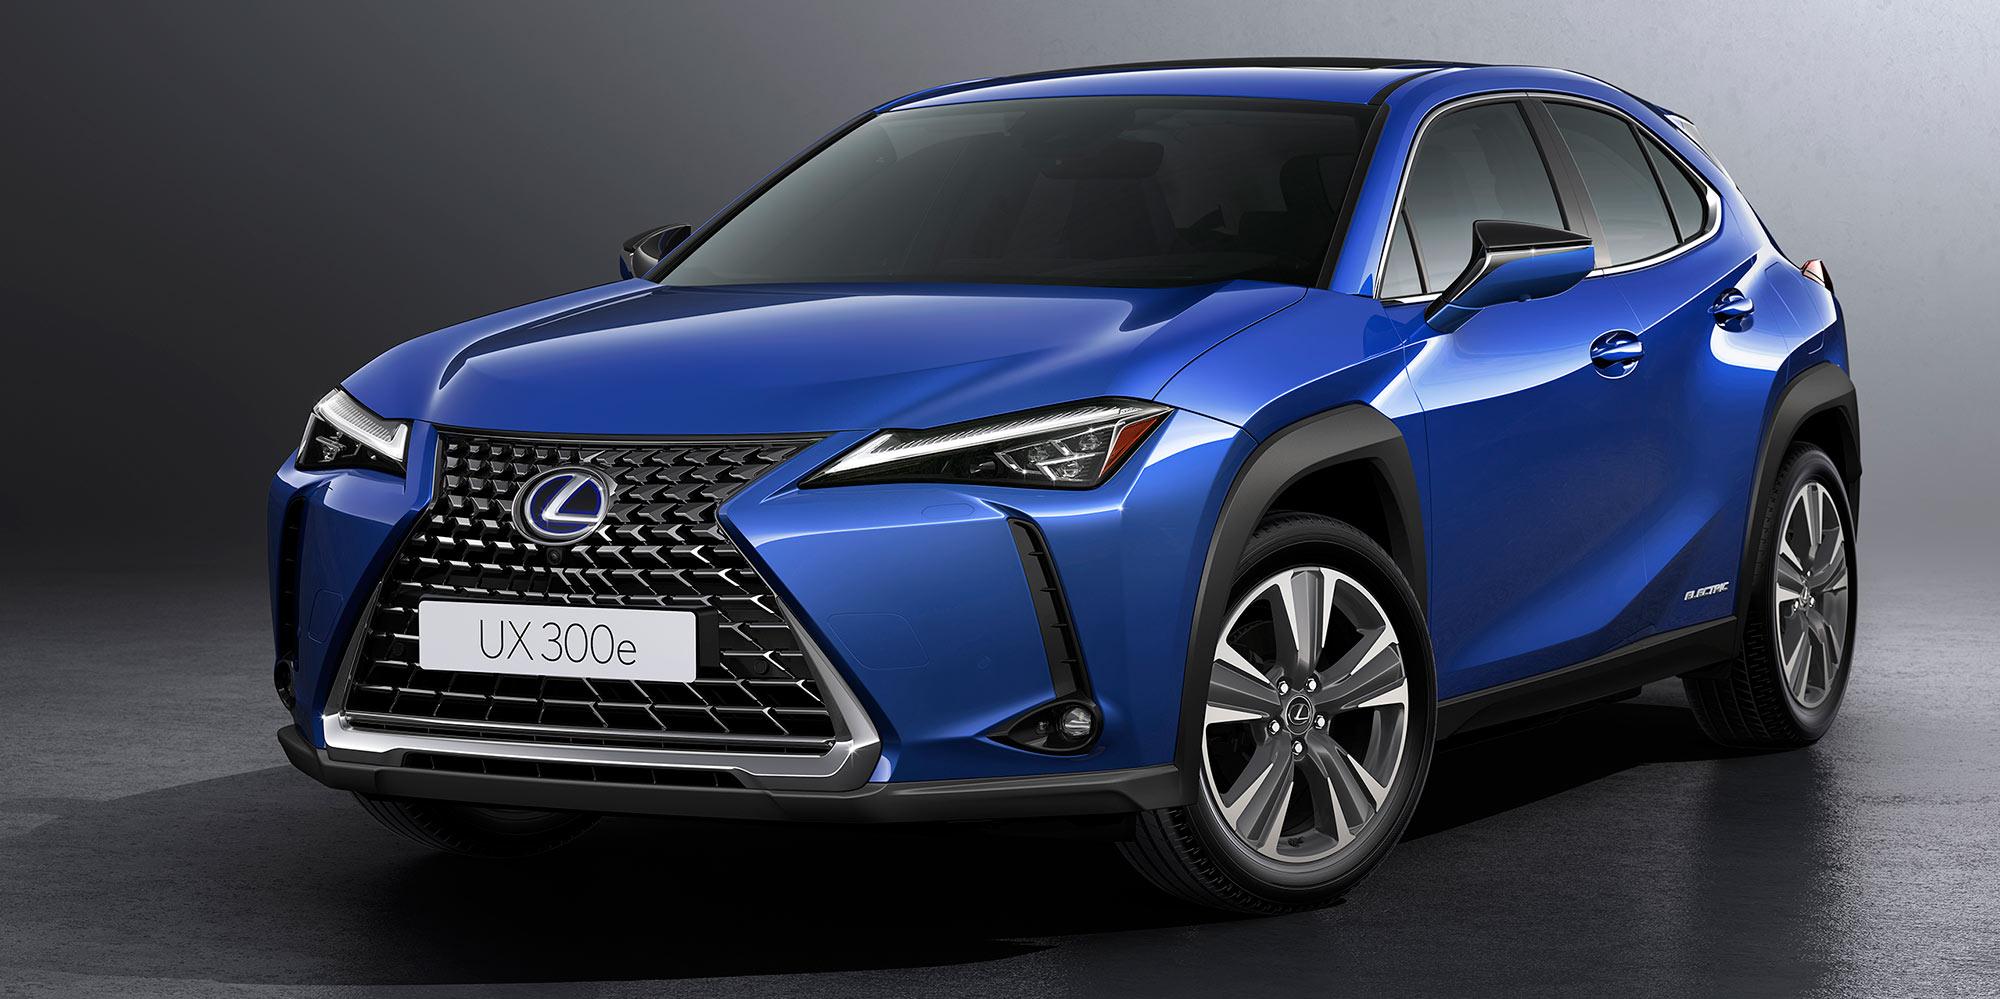 Allelectric Lexus goes on sale in China this week, two Toyota EVs to